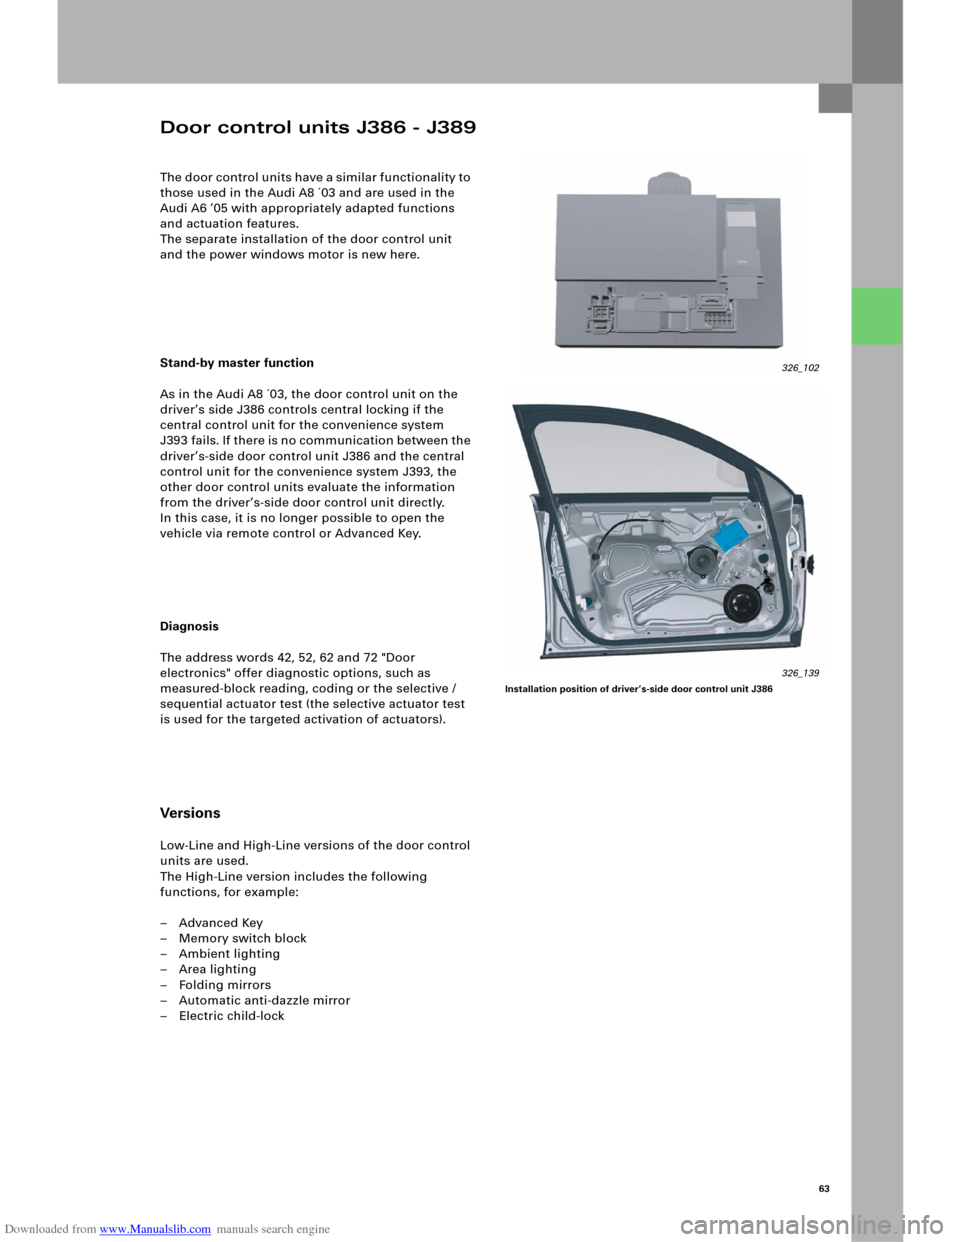 AUDI A6 2005 C5 / 2.G Electrics System Training Manual Downloaded from www.Manualslib.com manuals search engine 63
The door control units have a similar functionality to 
those used in the Audi A8 ´03 and are used in the 
Audi A6 ’05 with appropriately